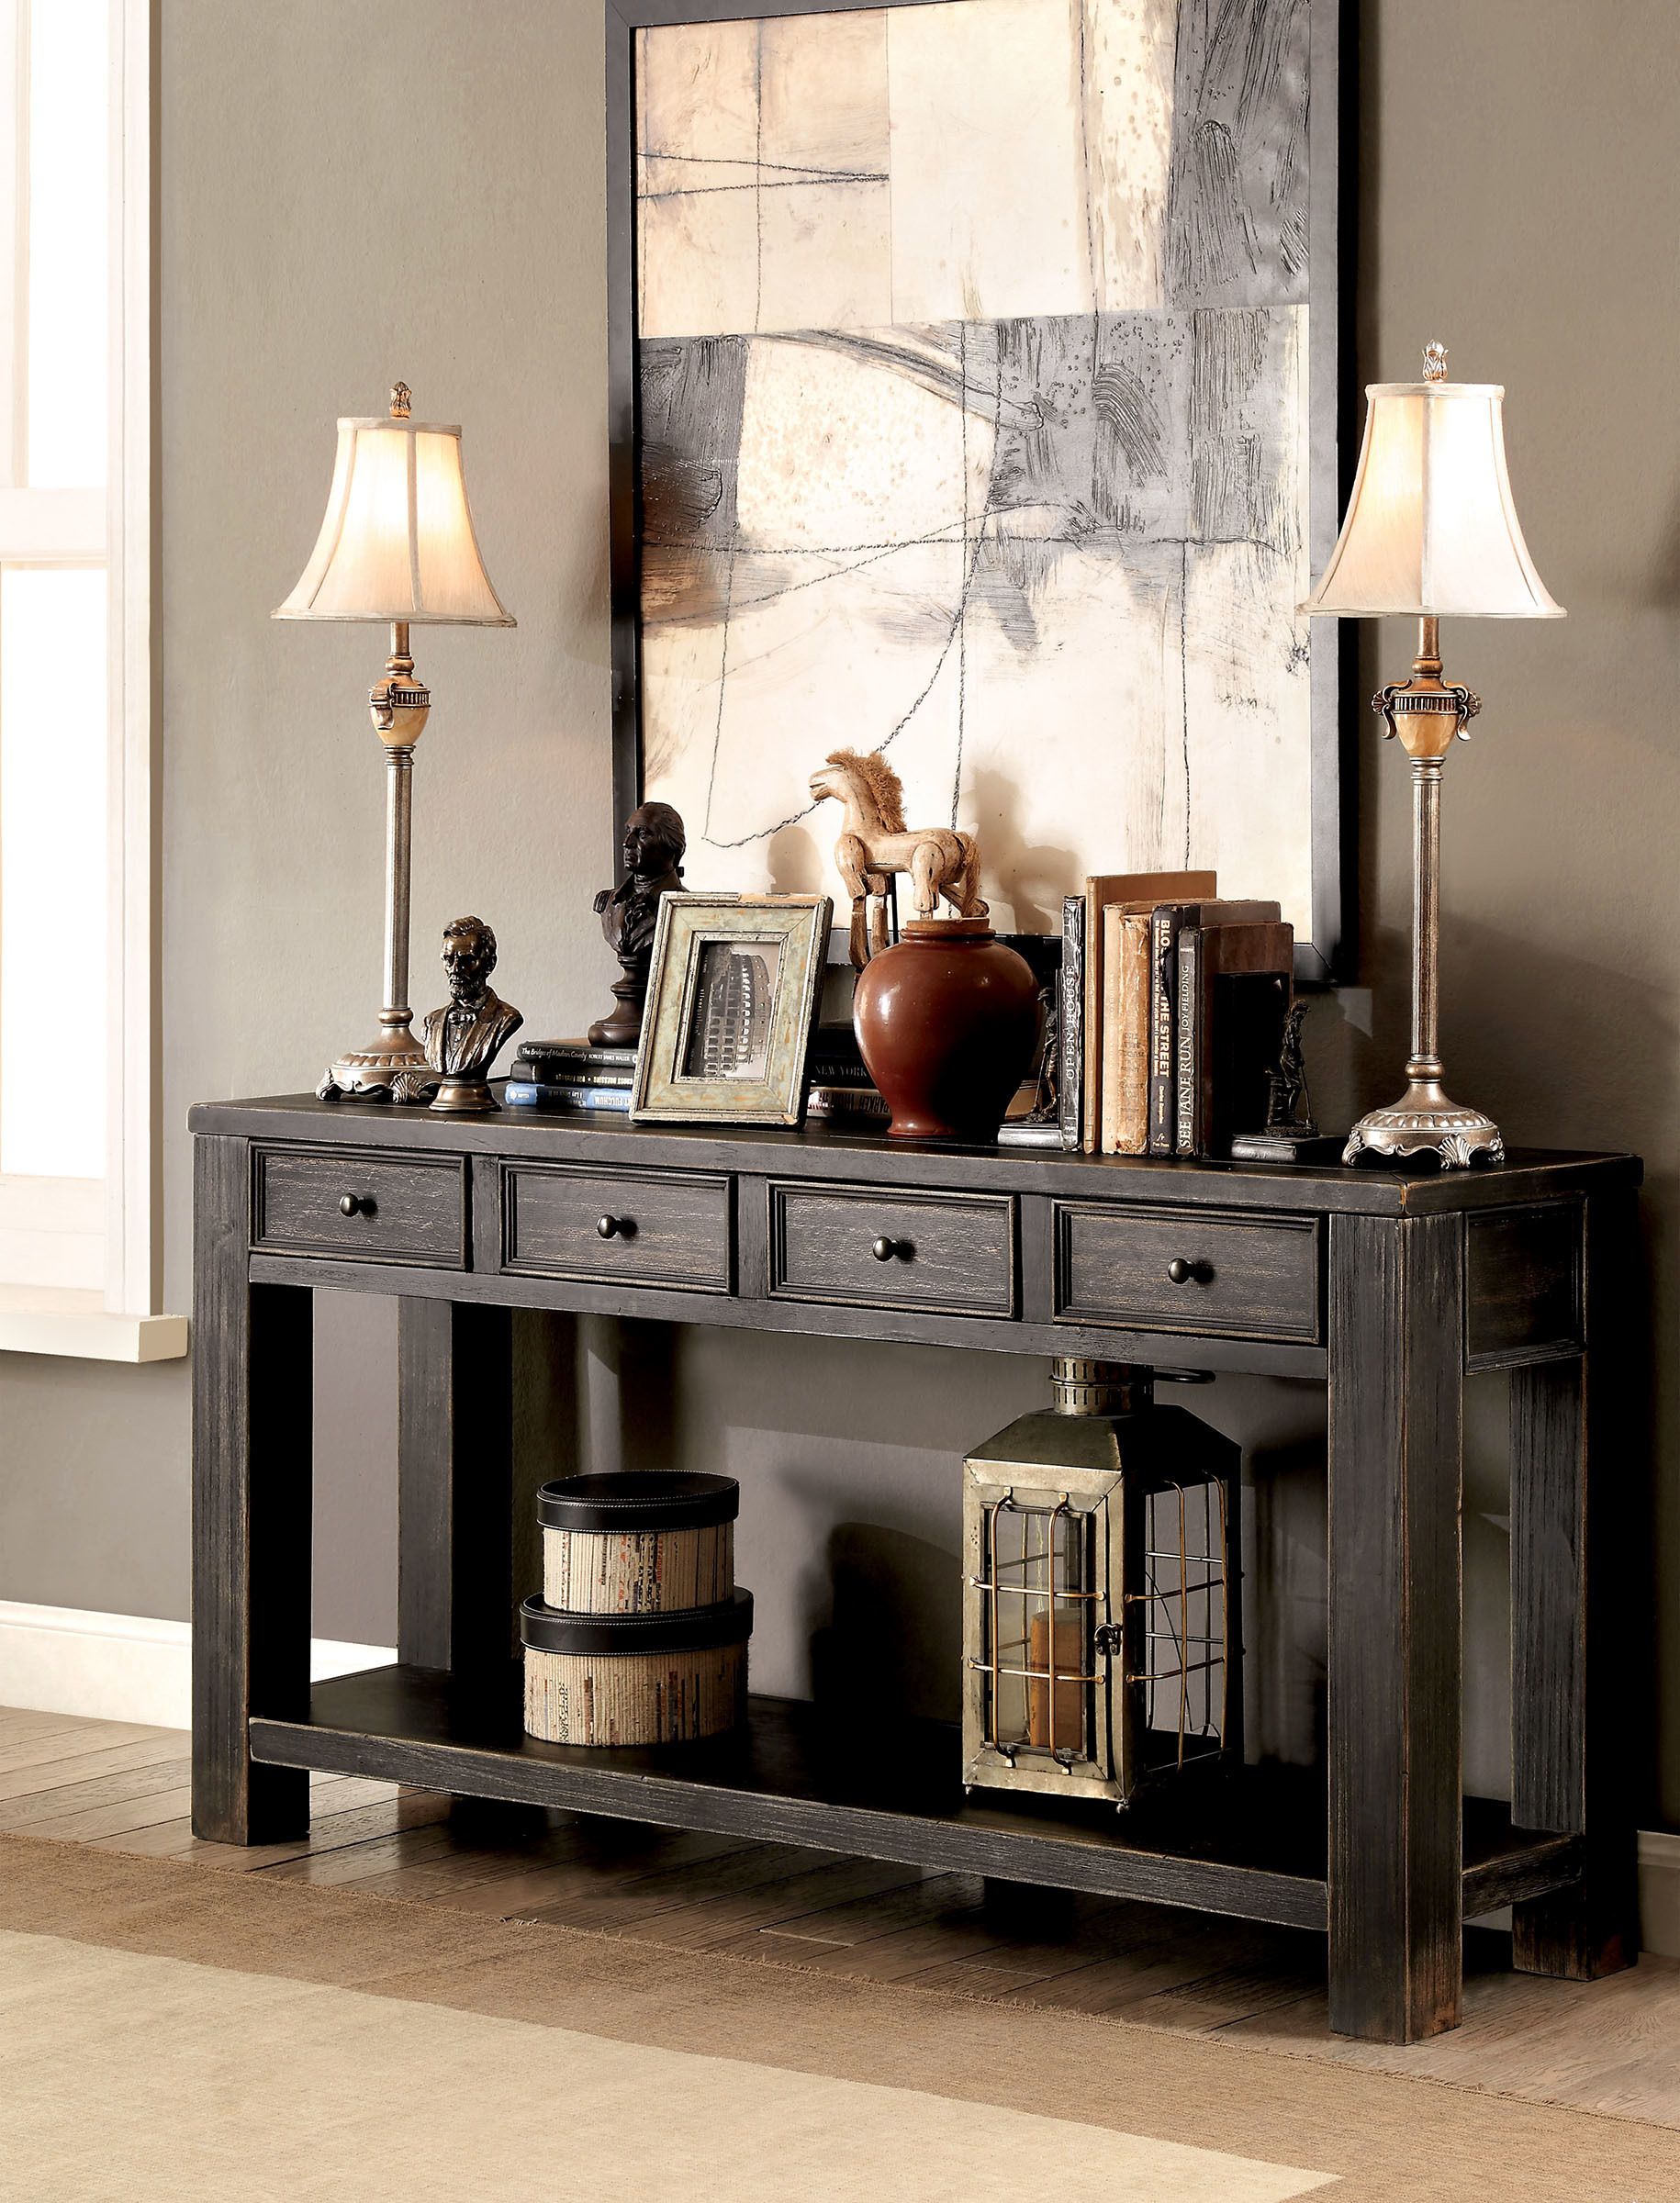 Vintage-inspired entryway table adorned with charming antique accessories